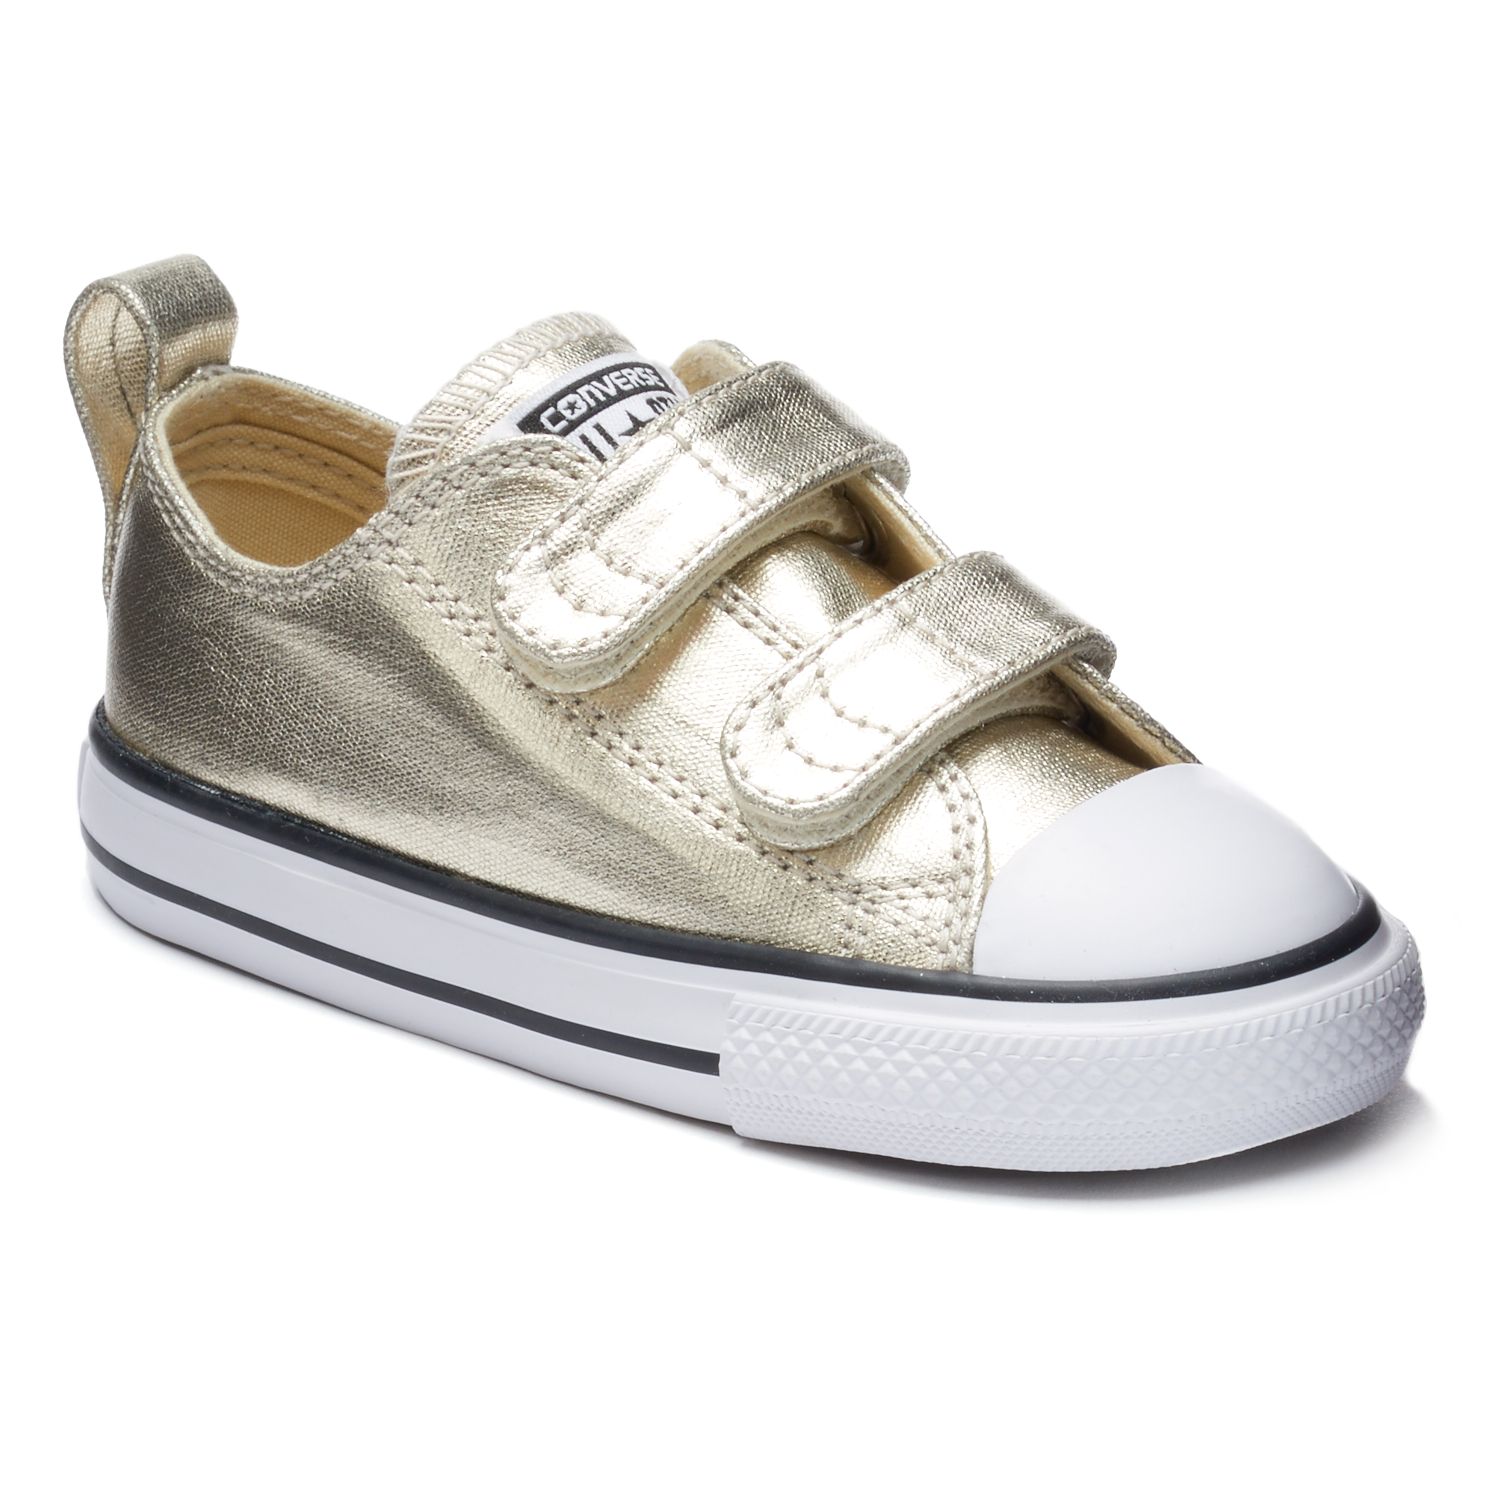 brown toddler converse shoes